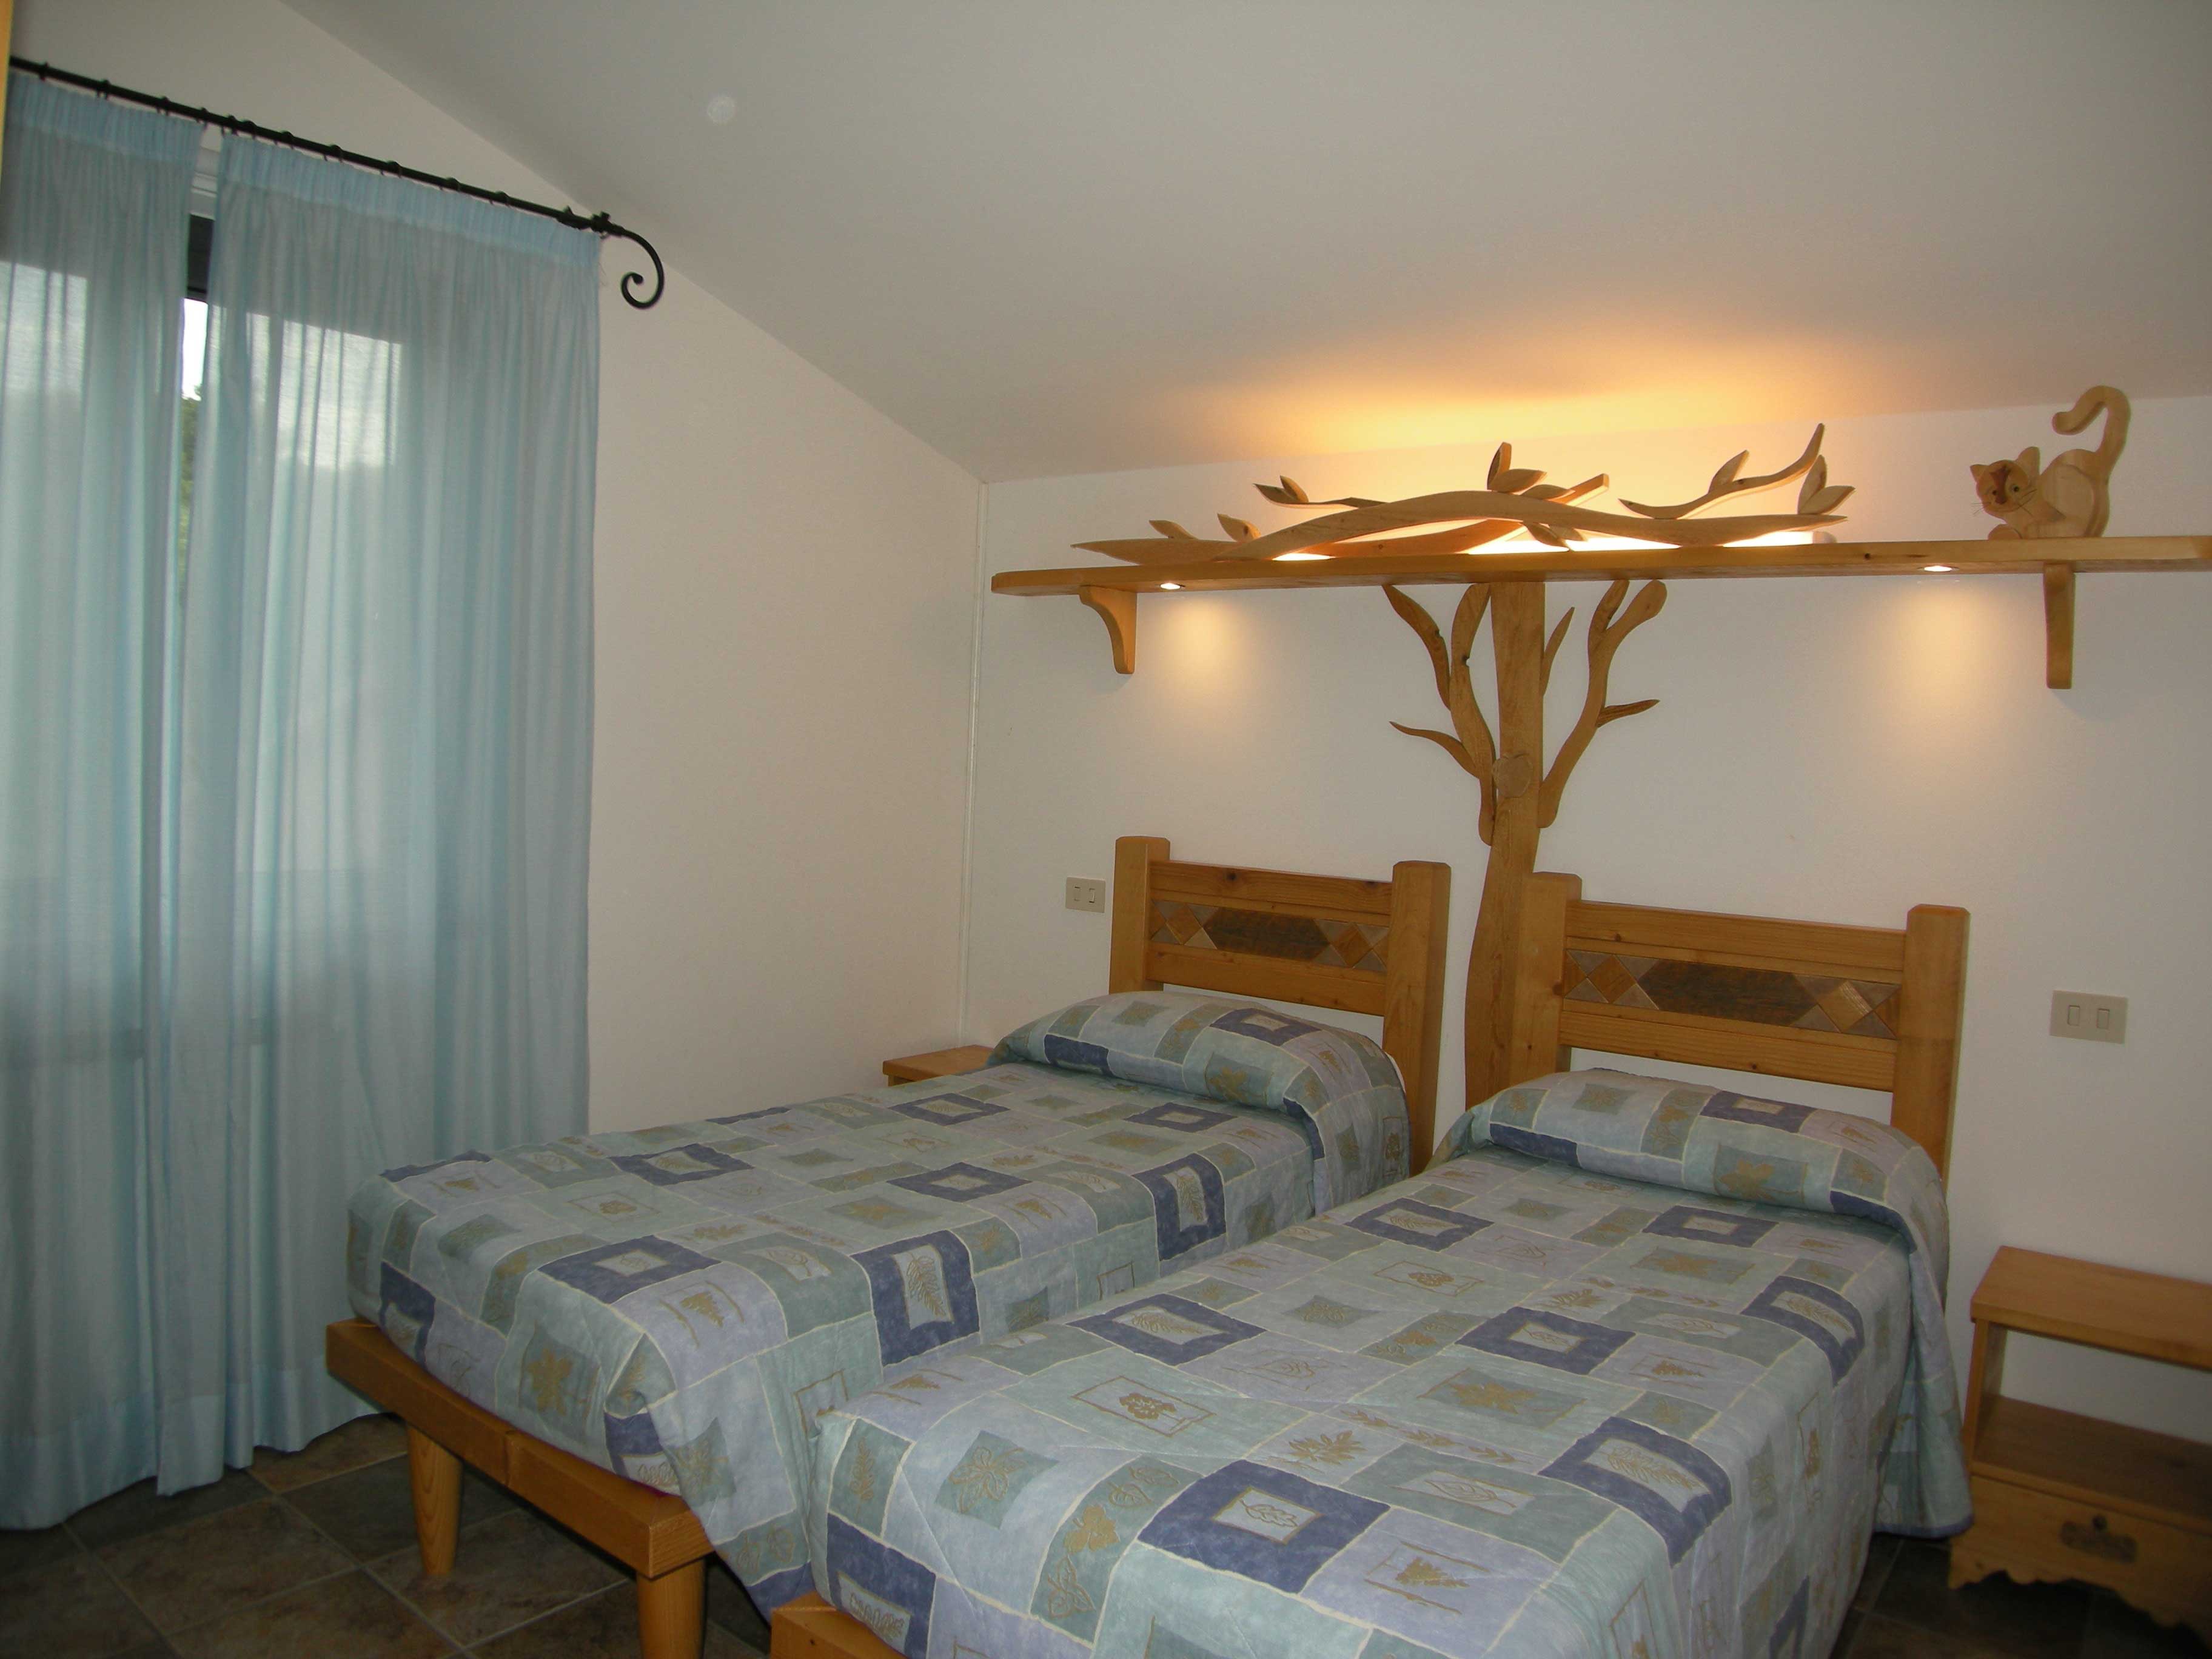 Bellissima villa with self catering apartments